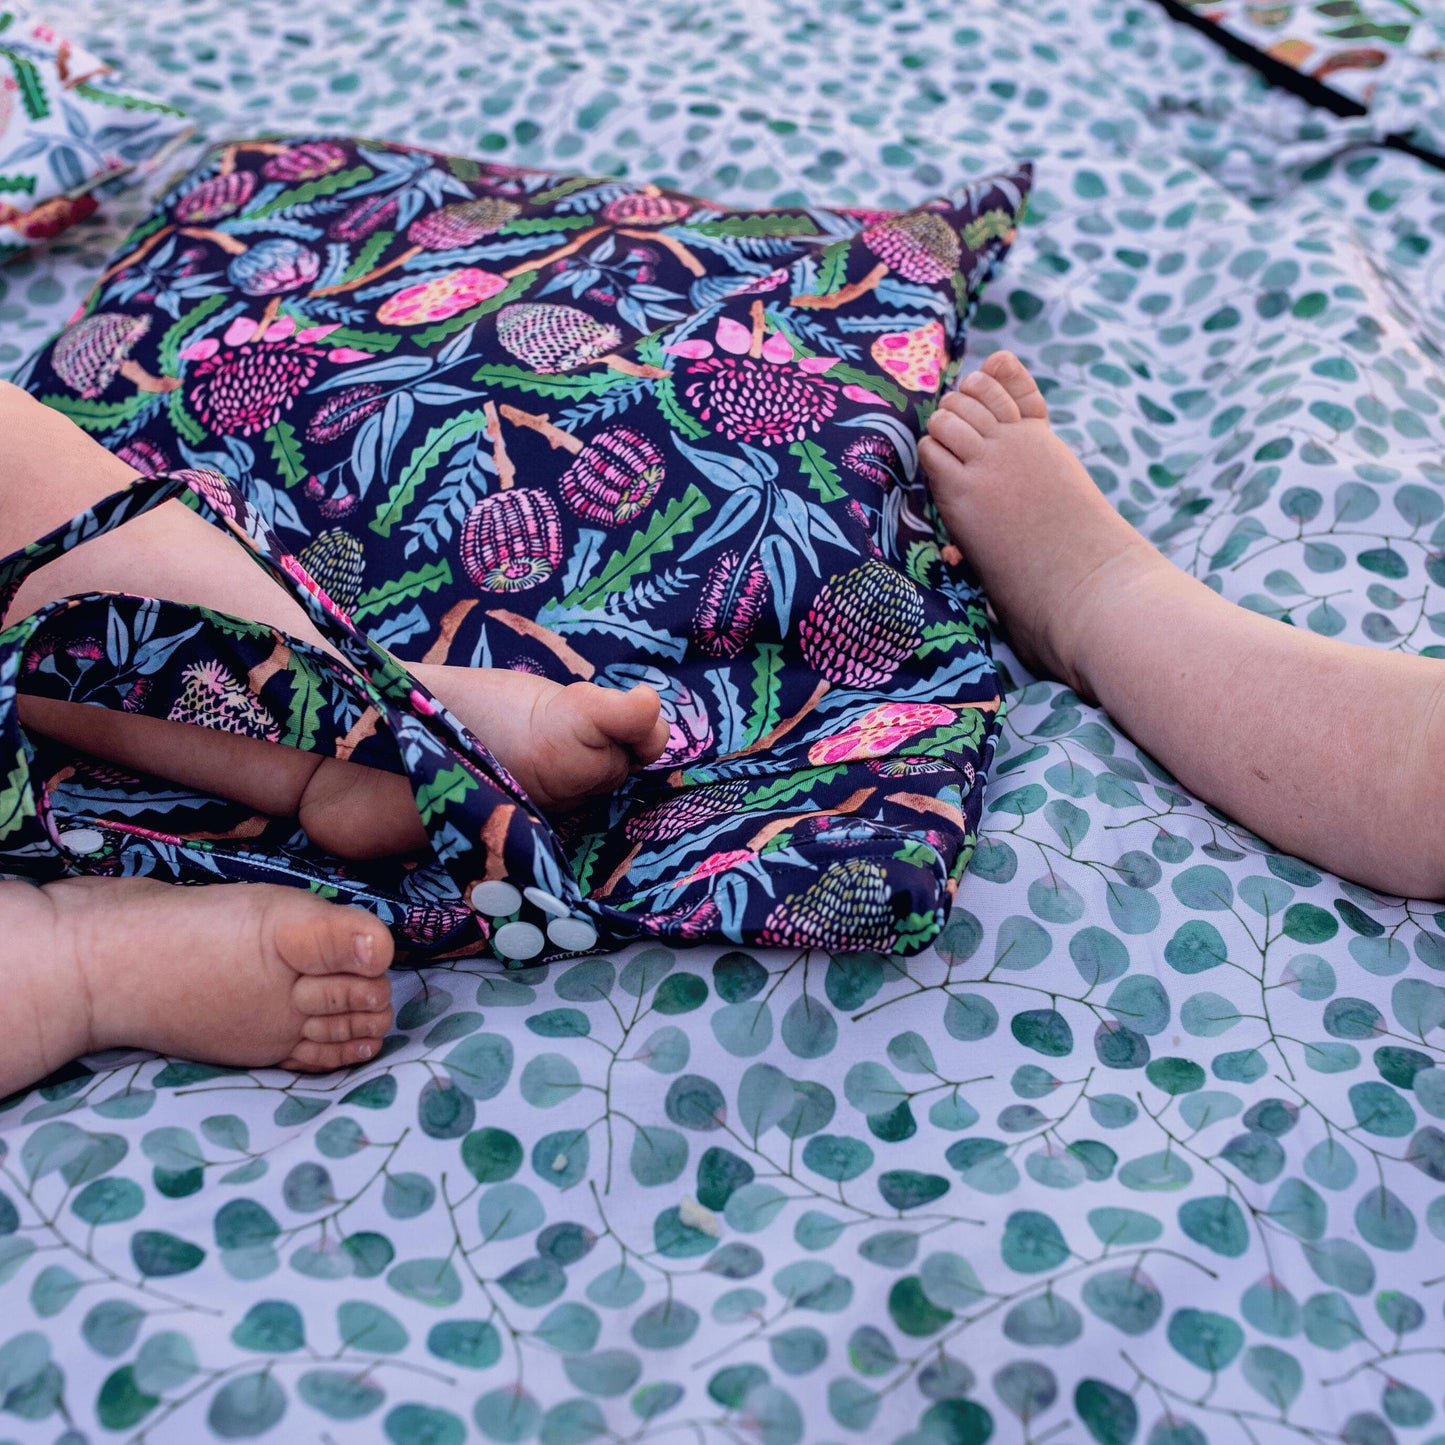 Earthside Eco Bums Giant Family Waterproof Mat PREORDER Open-Play Mat-Earthside Eco Bums-Bee Mine-The Nappy Market